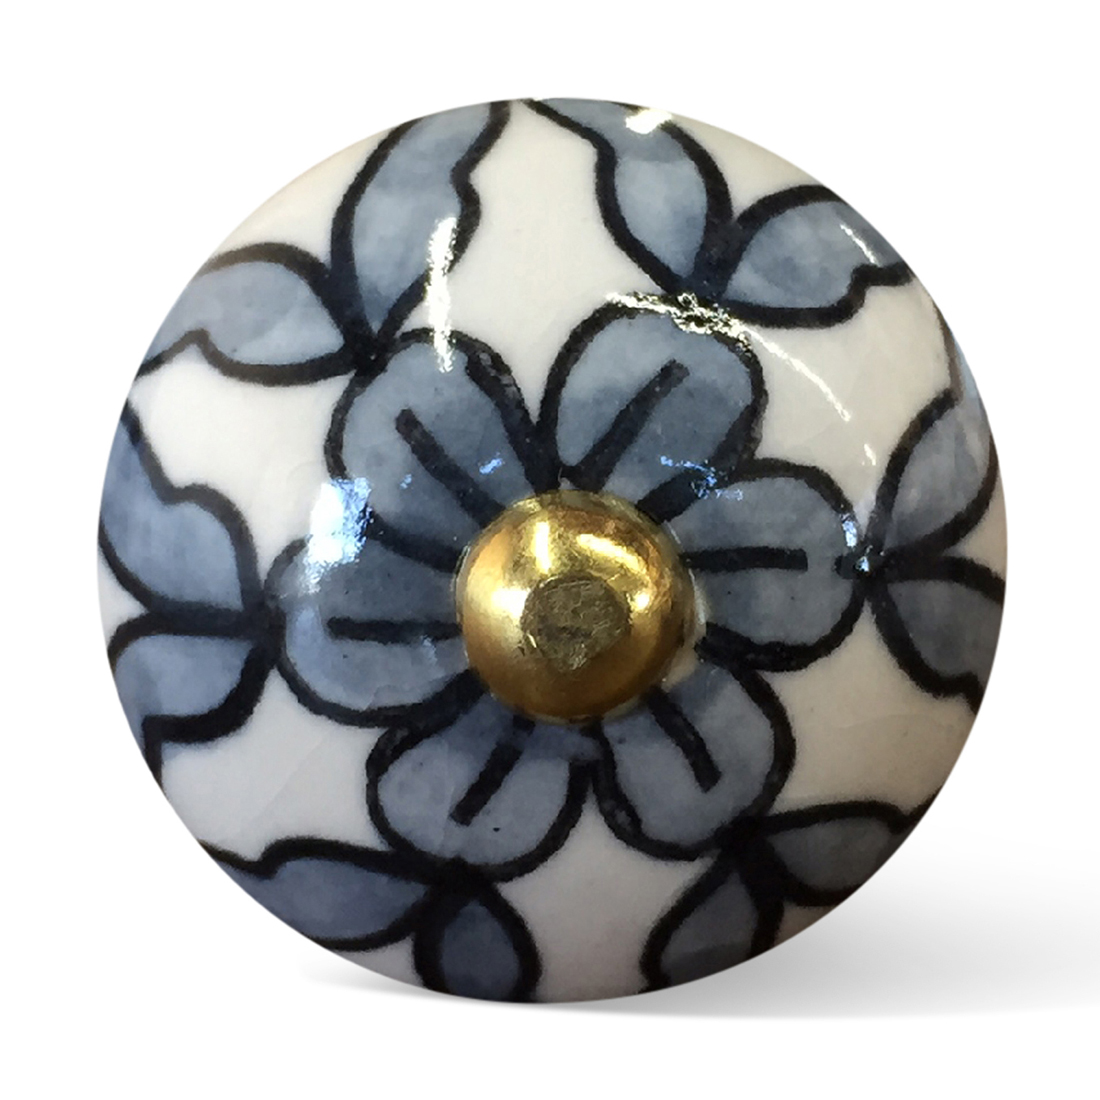 1.5" x 1.5" x 1.5" White, Blue and Black - Knobs 12-Pack